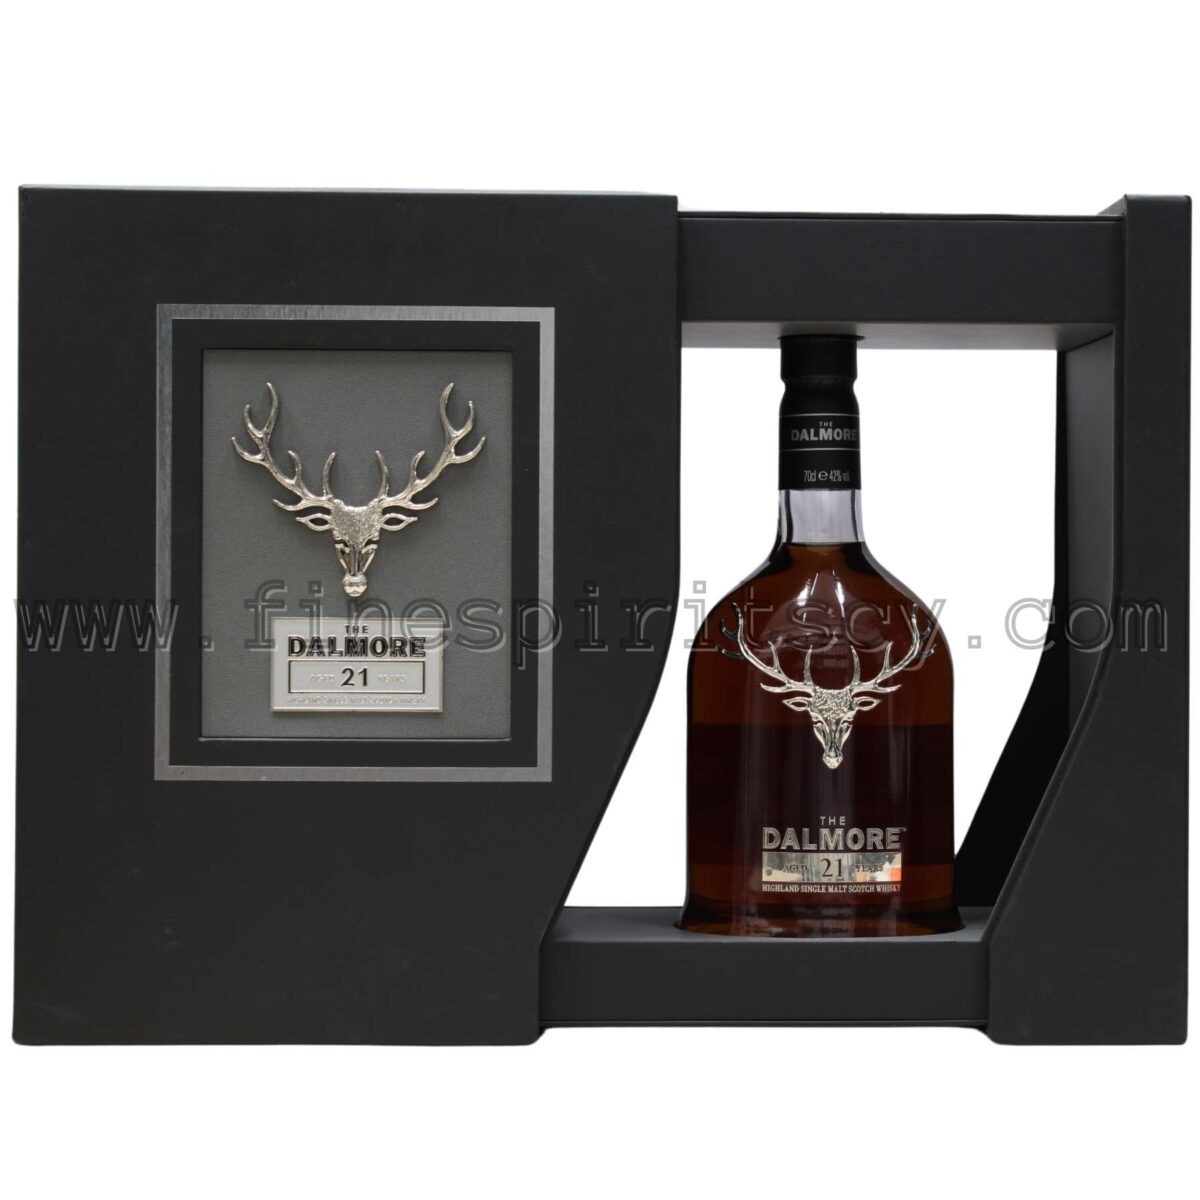 Dalmore 21 Years Old Price Fine Spirits Open Box Collectable Old Rare Discontinued